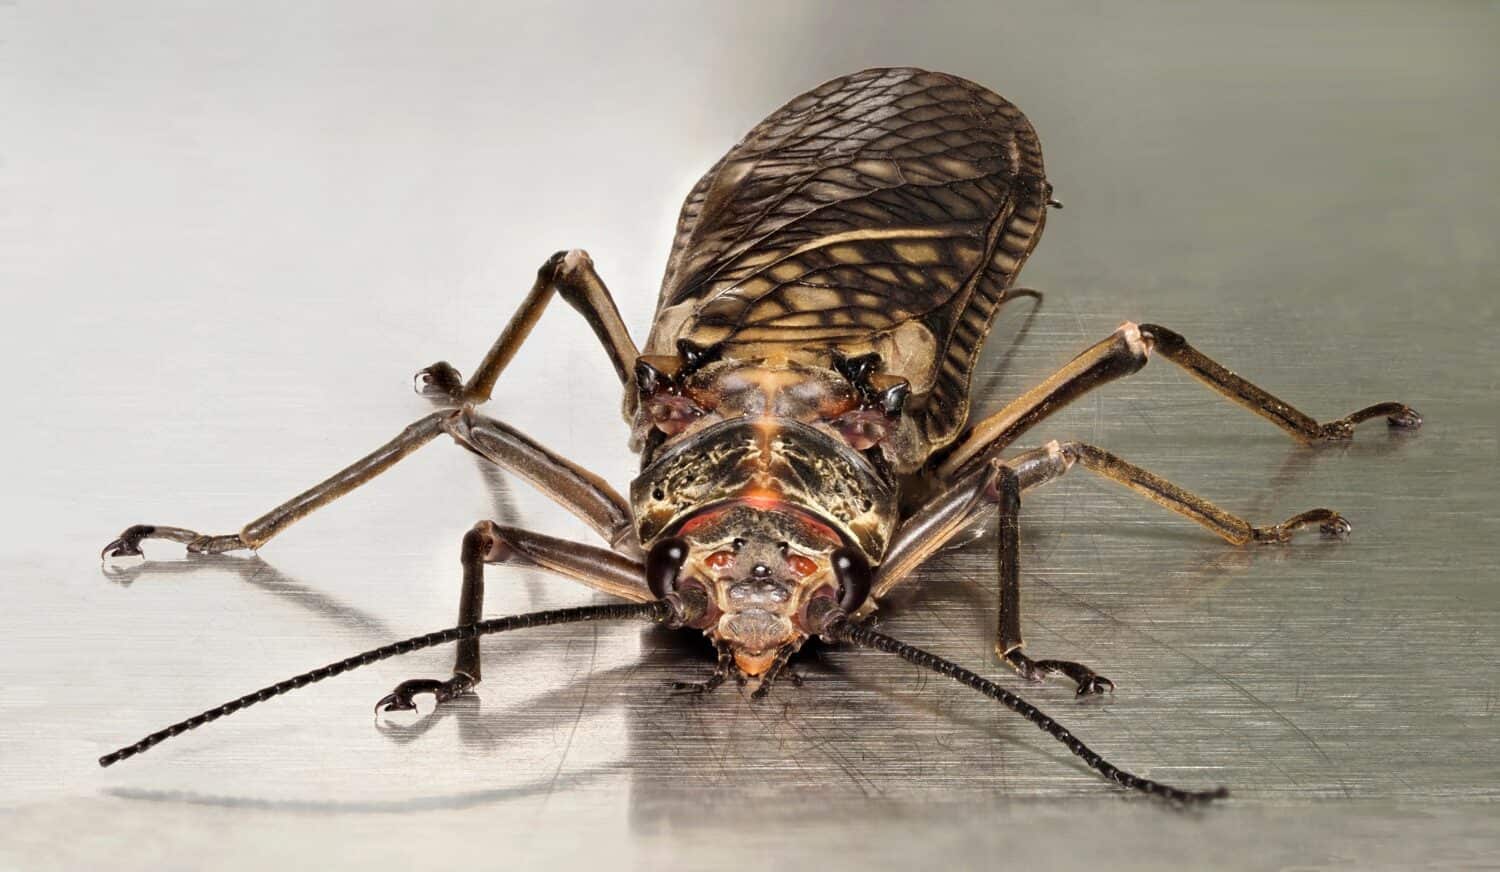 A Head on Close-up Focus Stacked Image of a Giant Stonefly on a Brushed Stainless Steel Surface